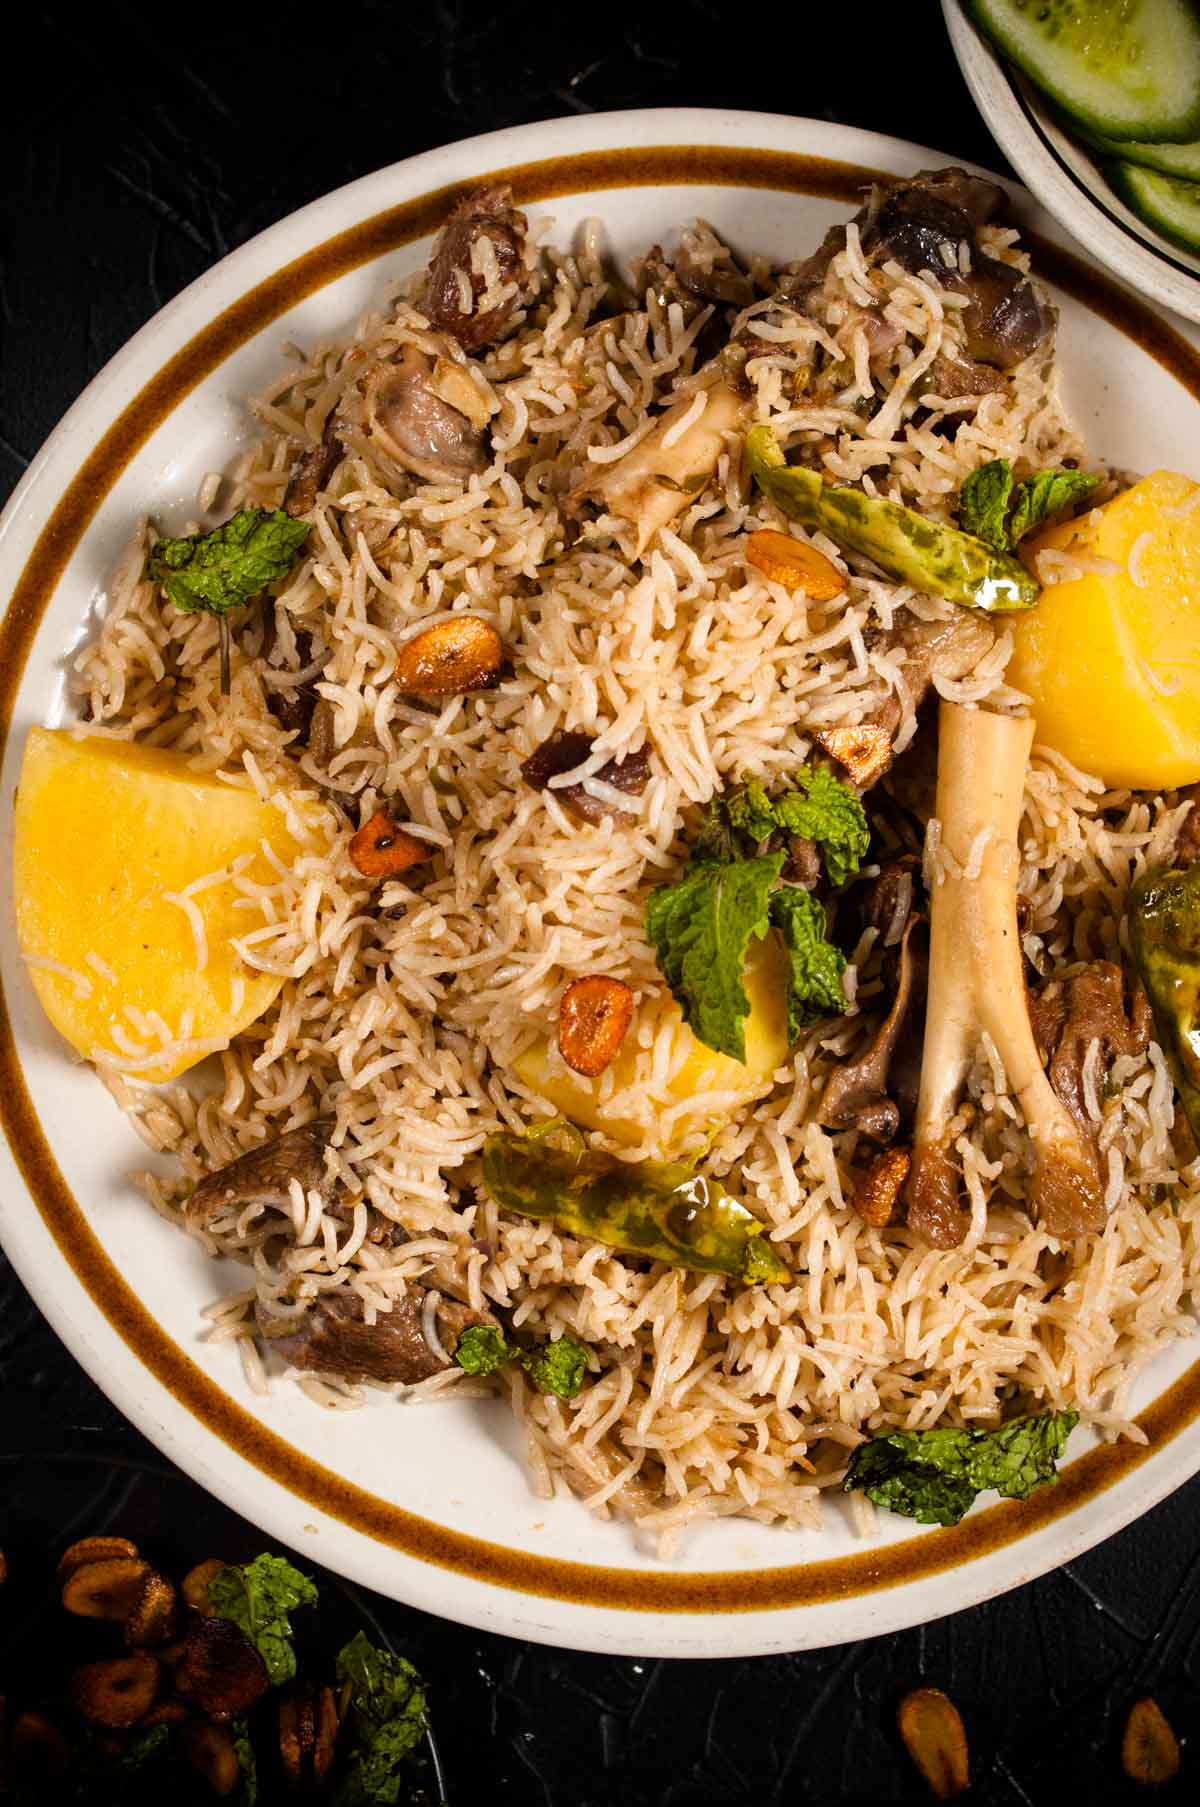 A close shot of pulao in the plate clearly showing the grains.